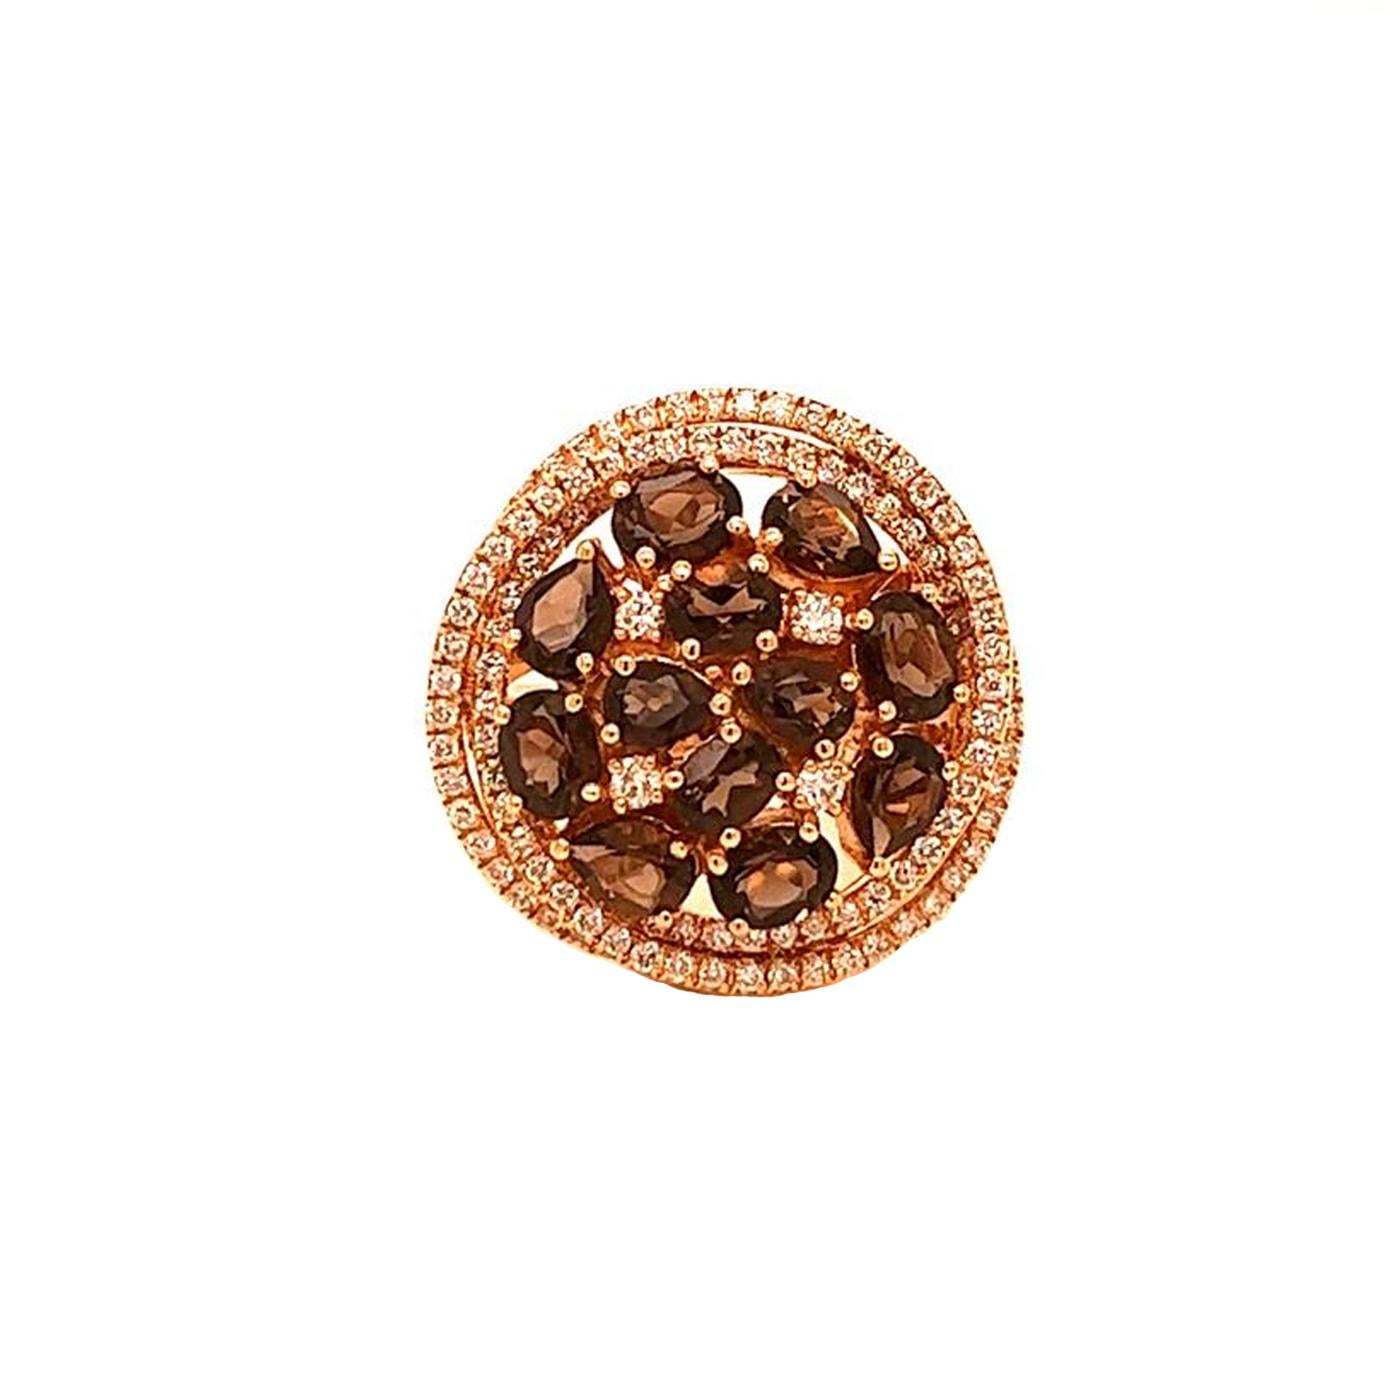 Modernist 0.88ct Chocolate Sapphire with Nautral Diamonds 18k Gold Spiral Cocktail Ring For Sale